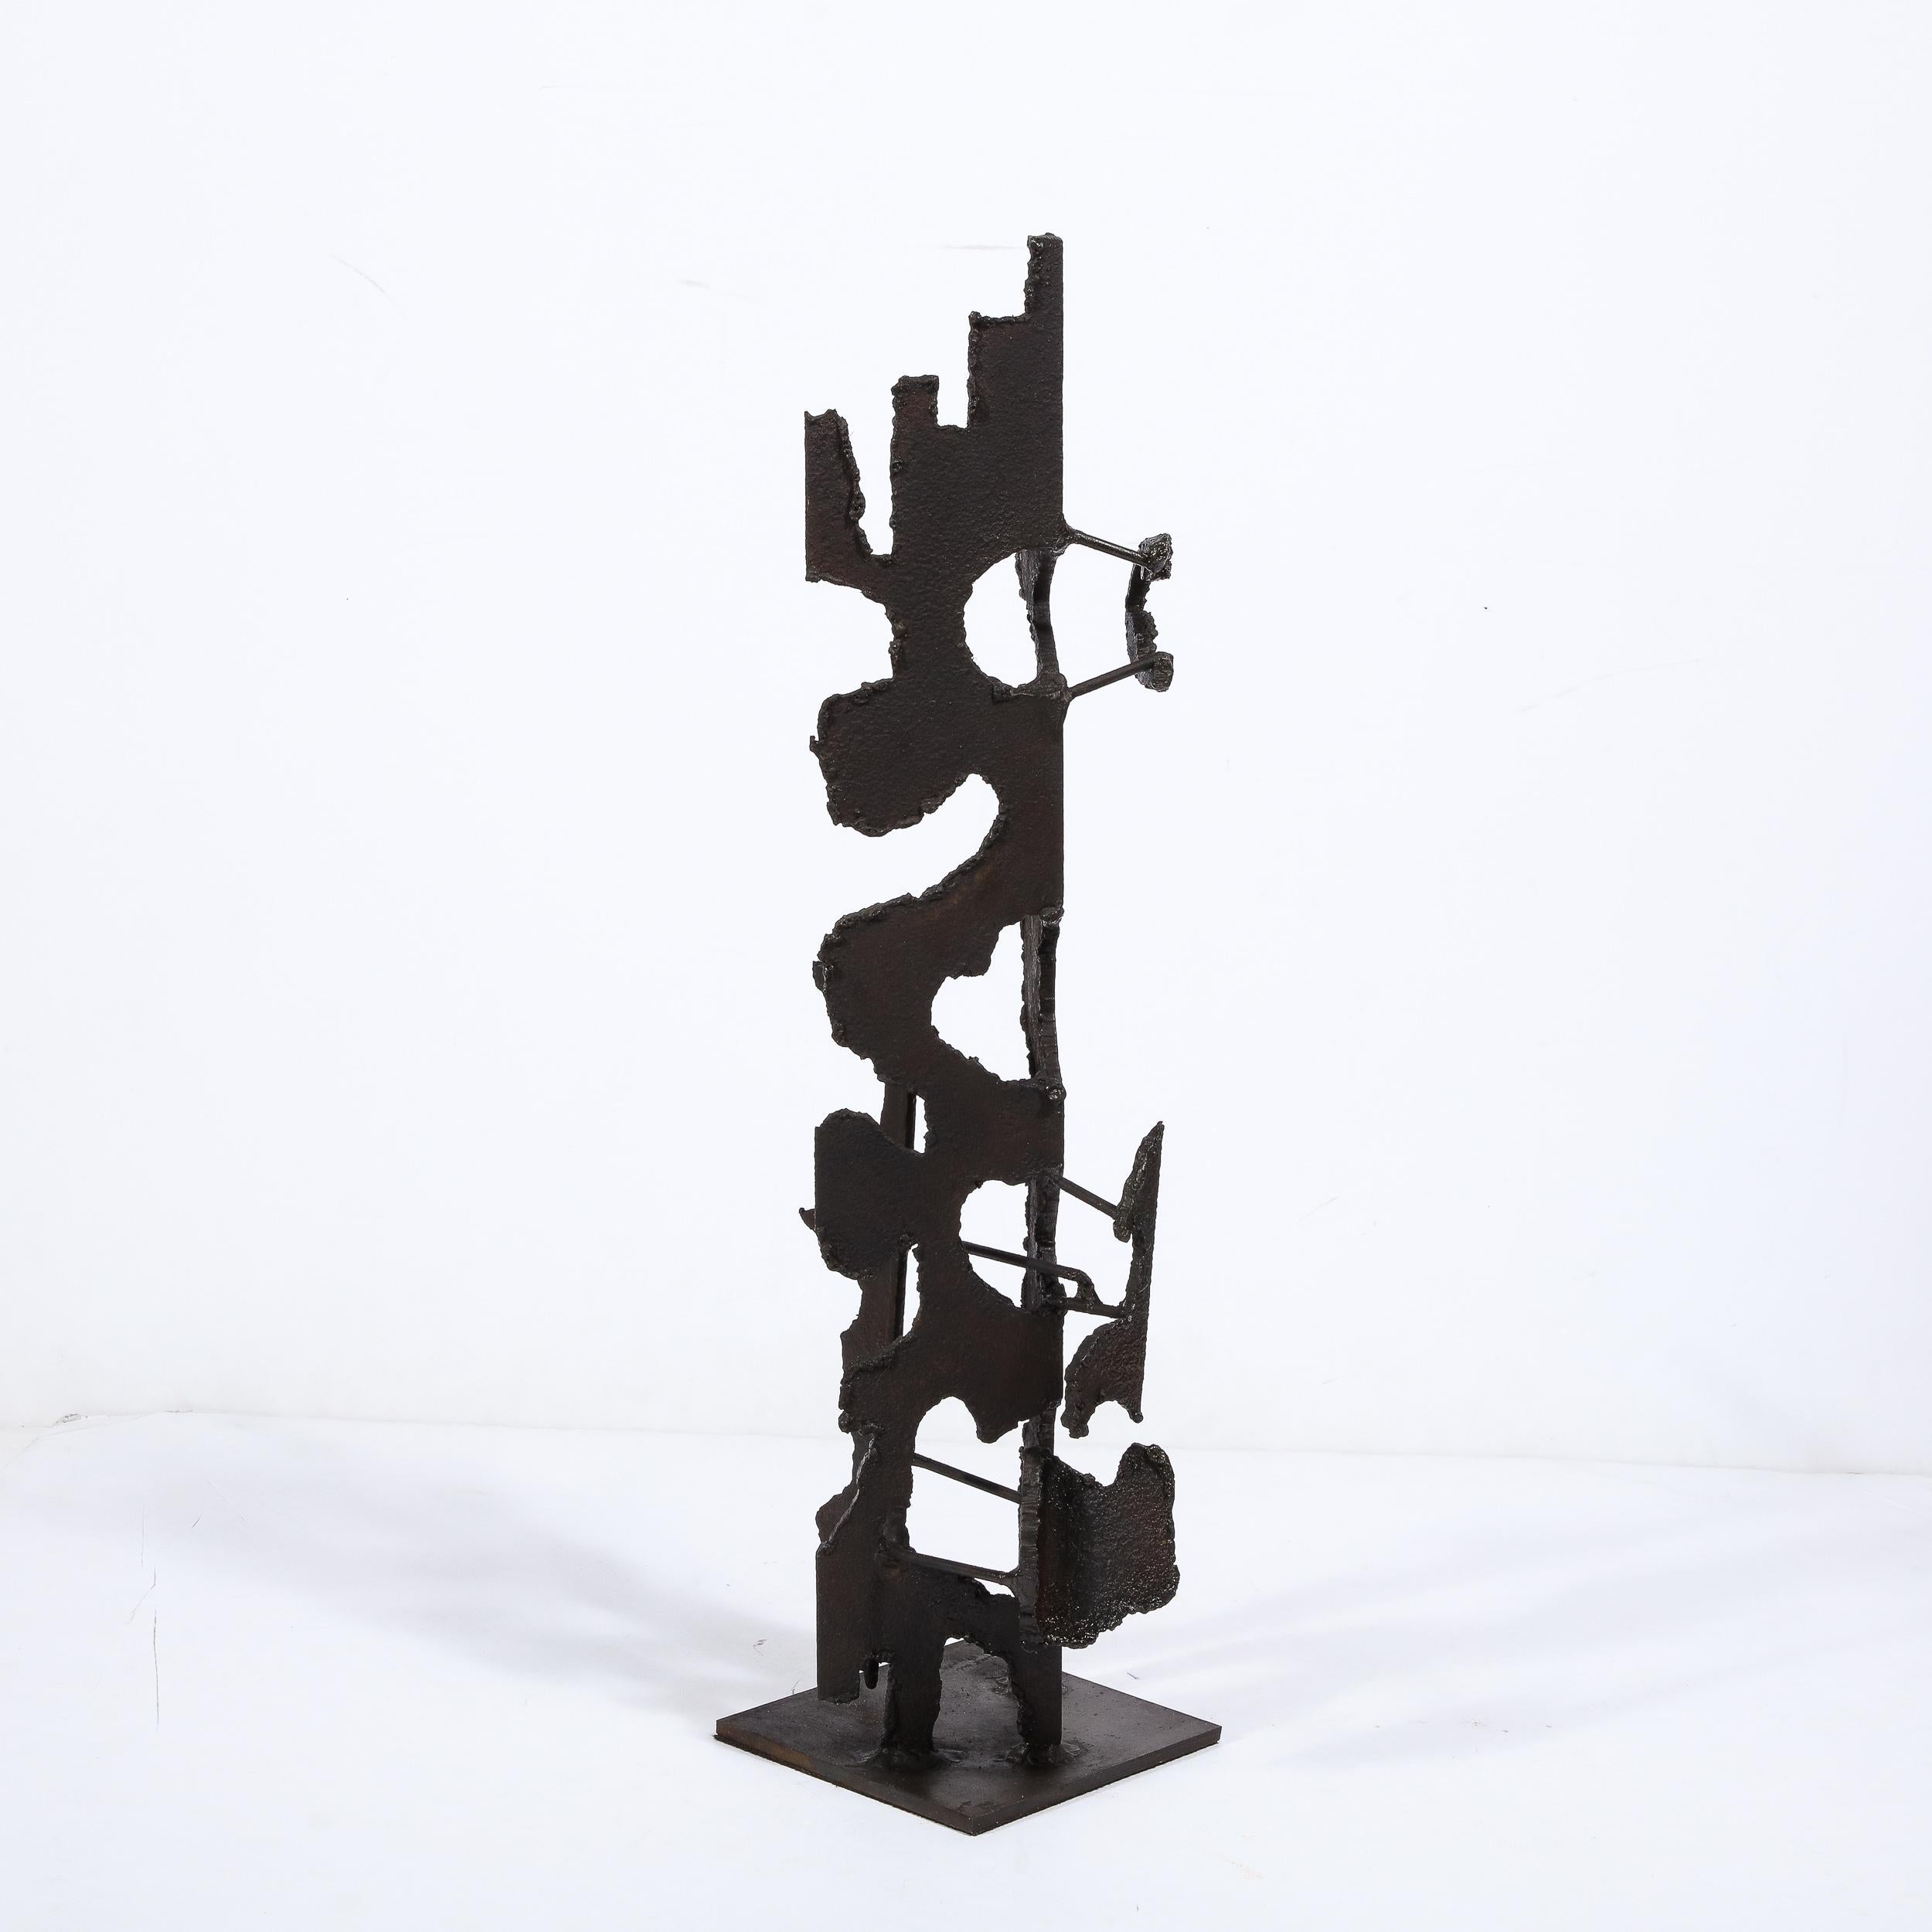 Brutalist Steel Sculpture in Oil and Waxed Finish by Jan Van Deckter For Sale 5